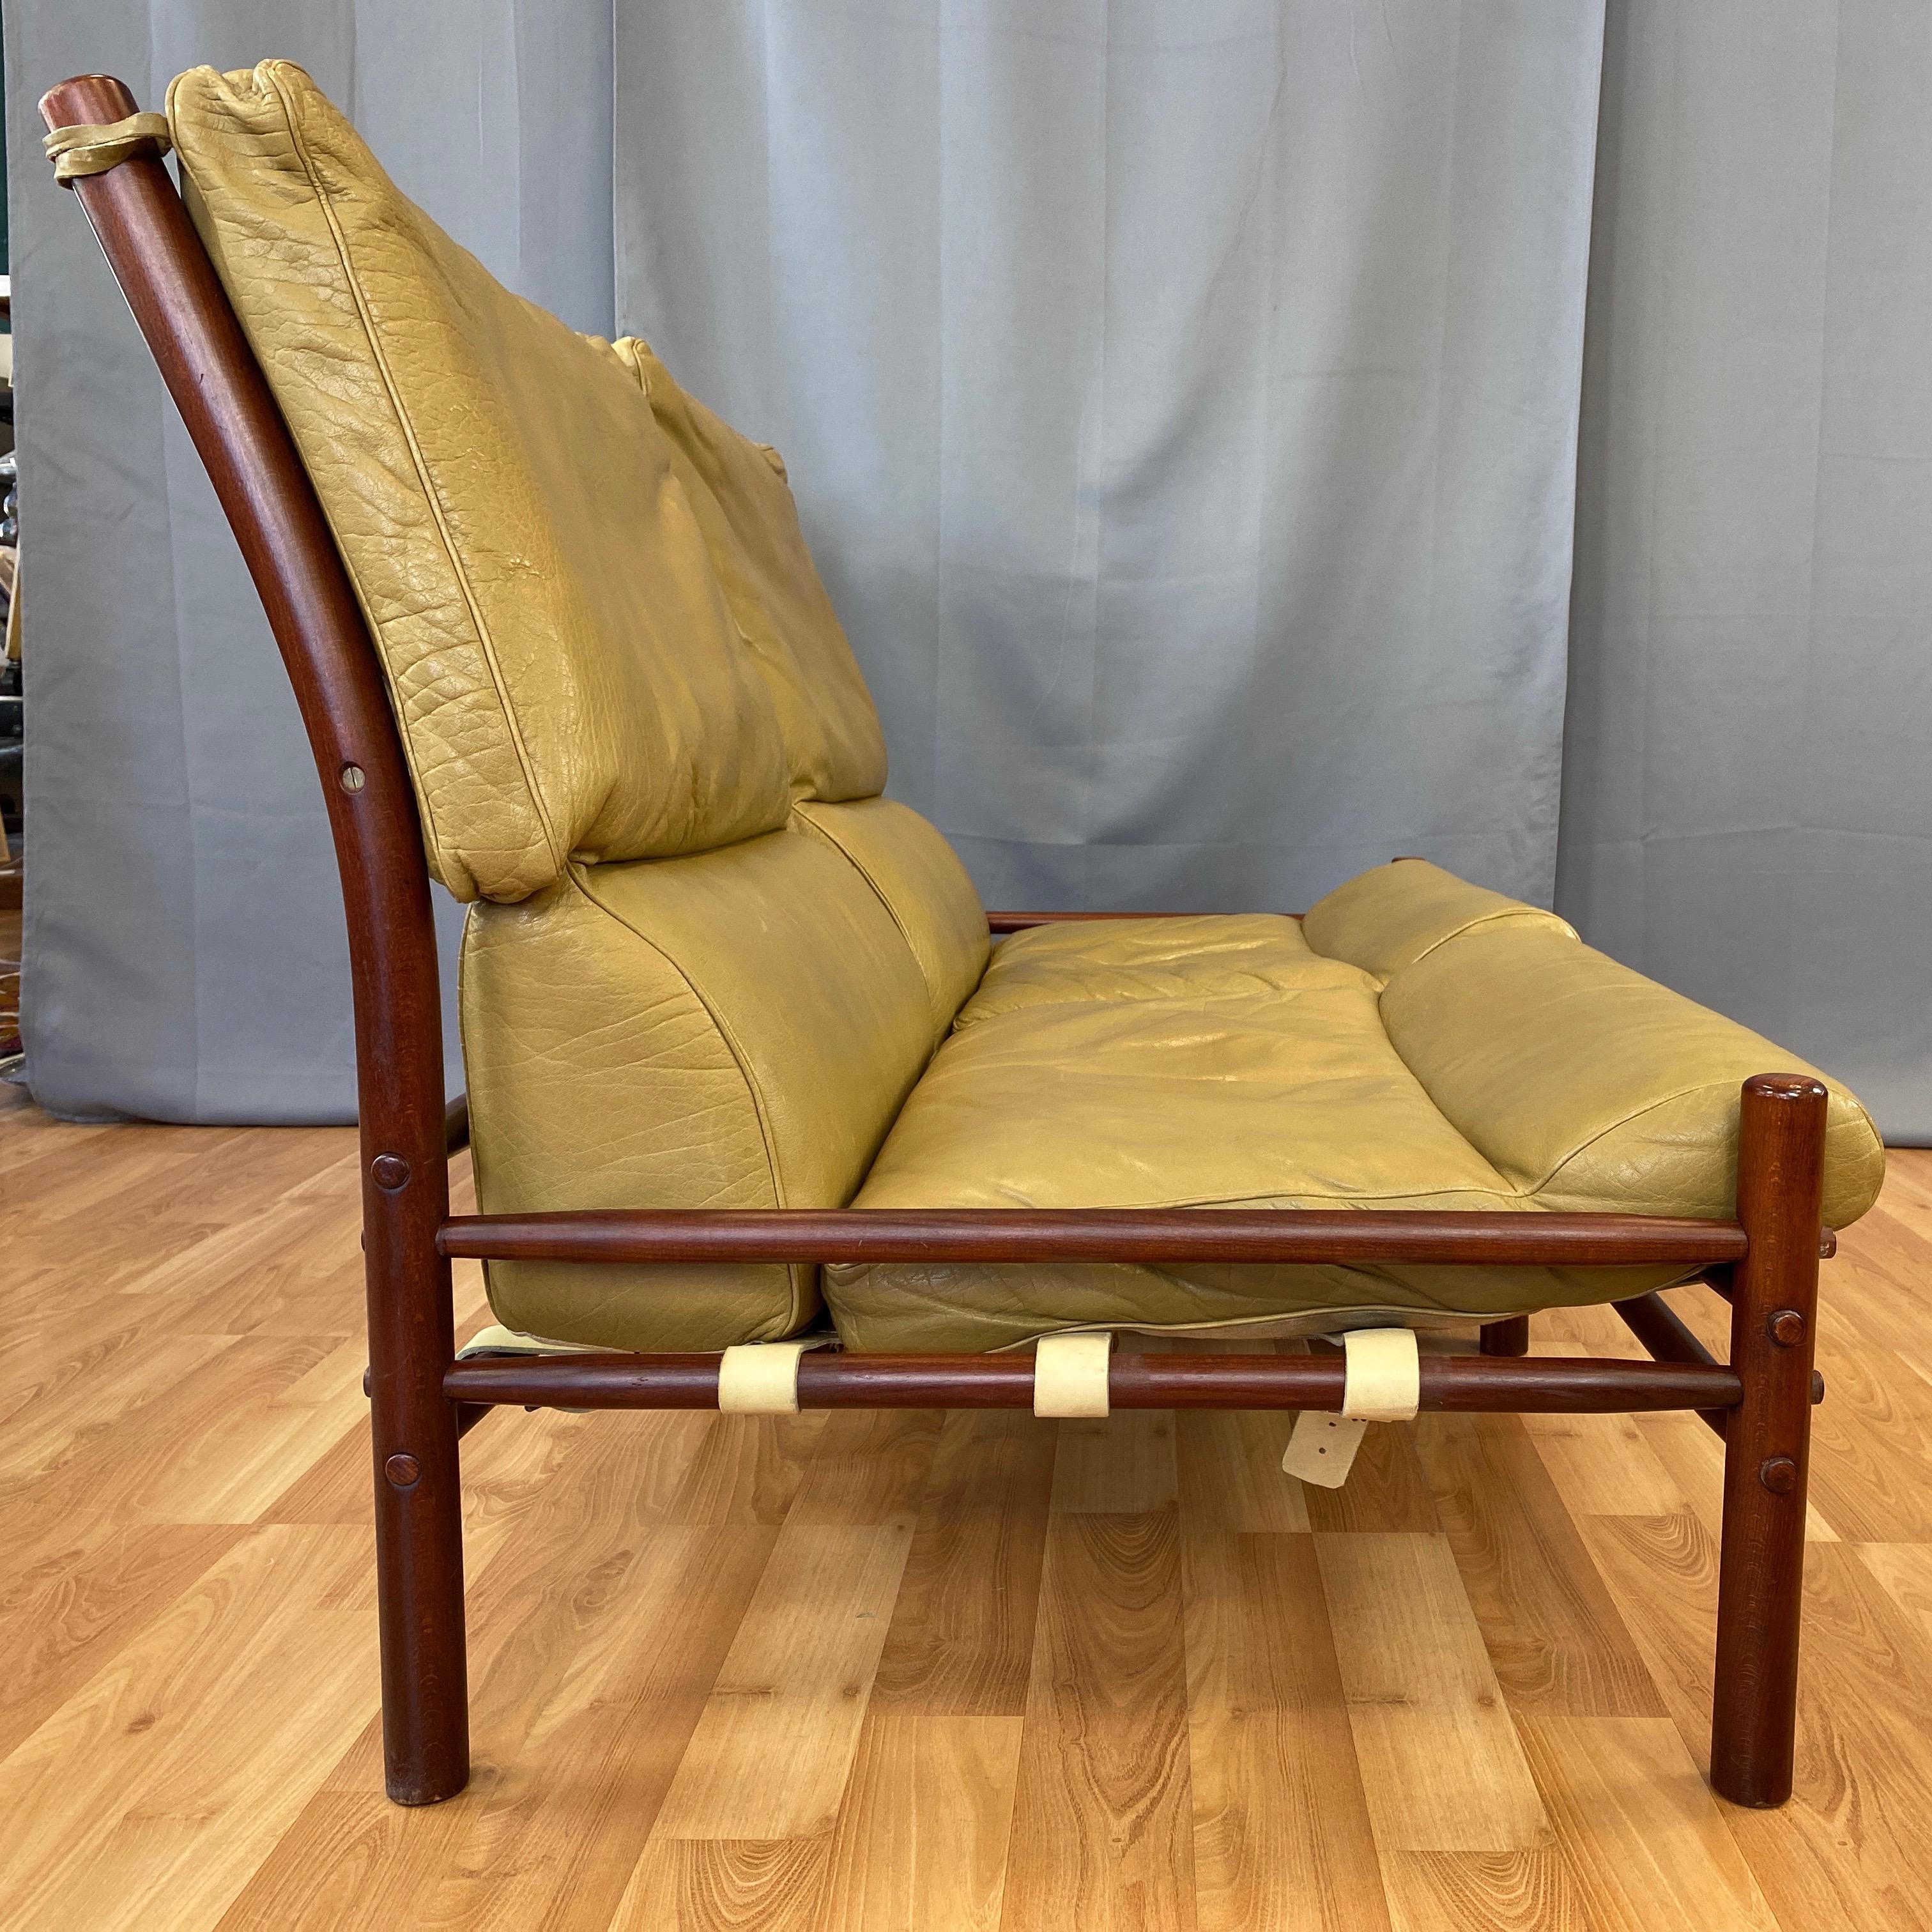 Stained Arne Norell Inca Armless Settee in Teak-Colored Beech and Tan Leather, 1970s